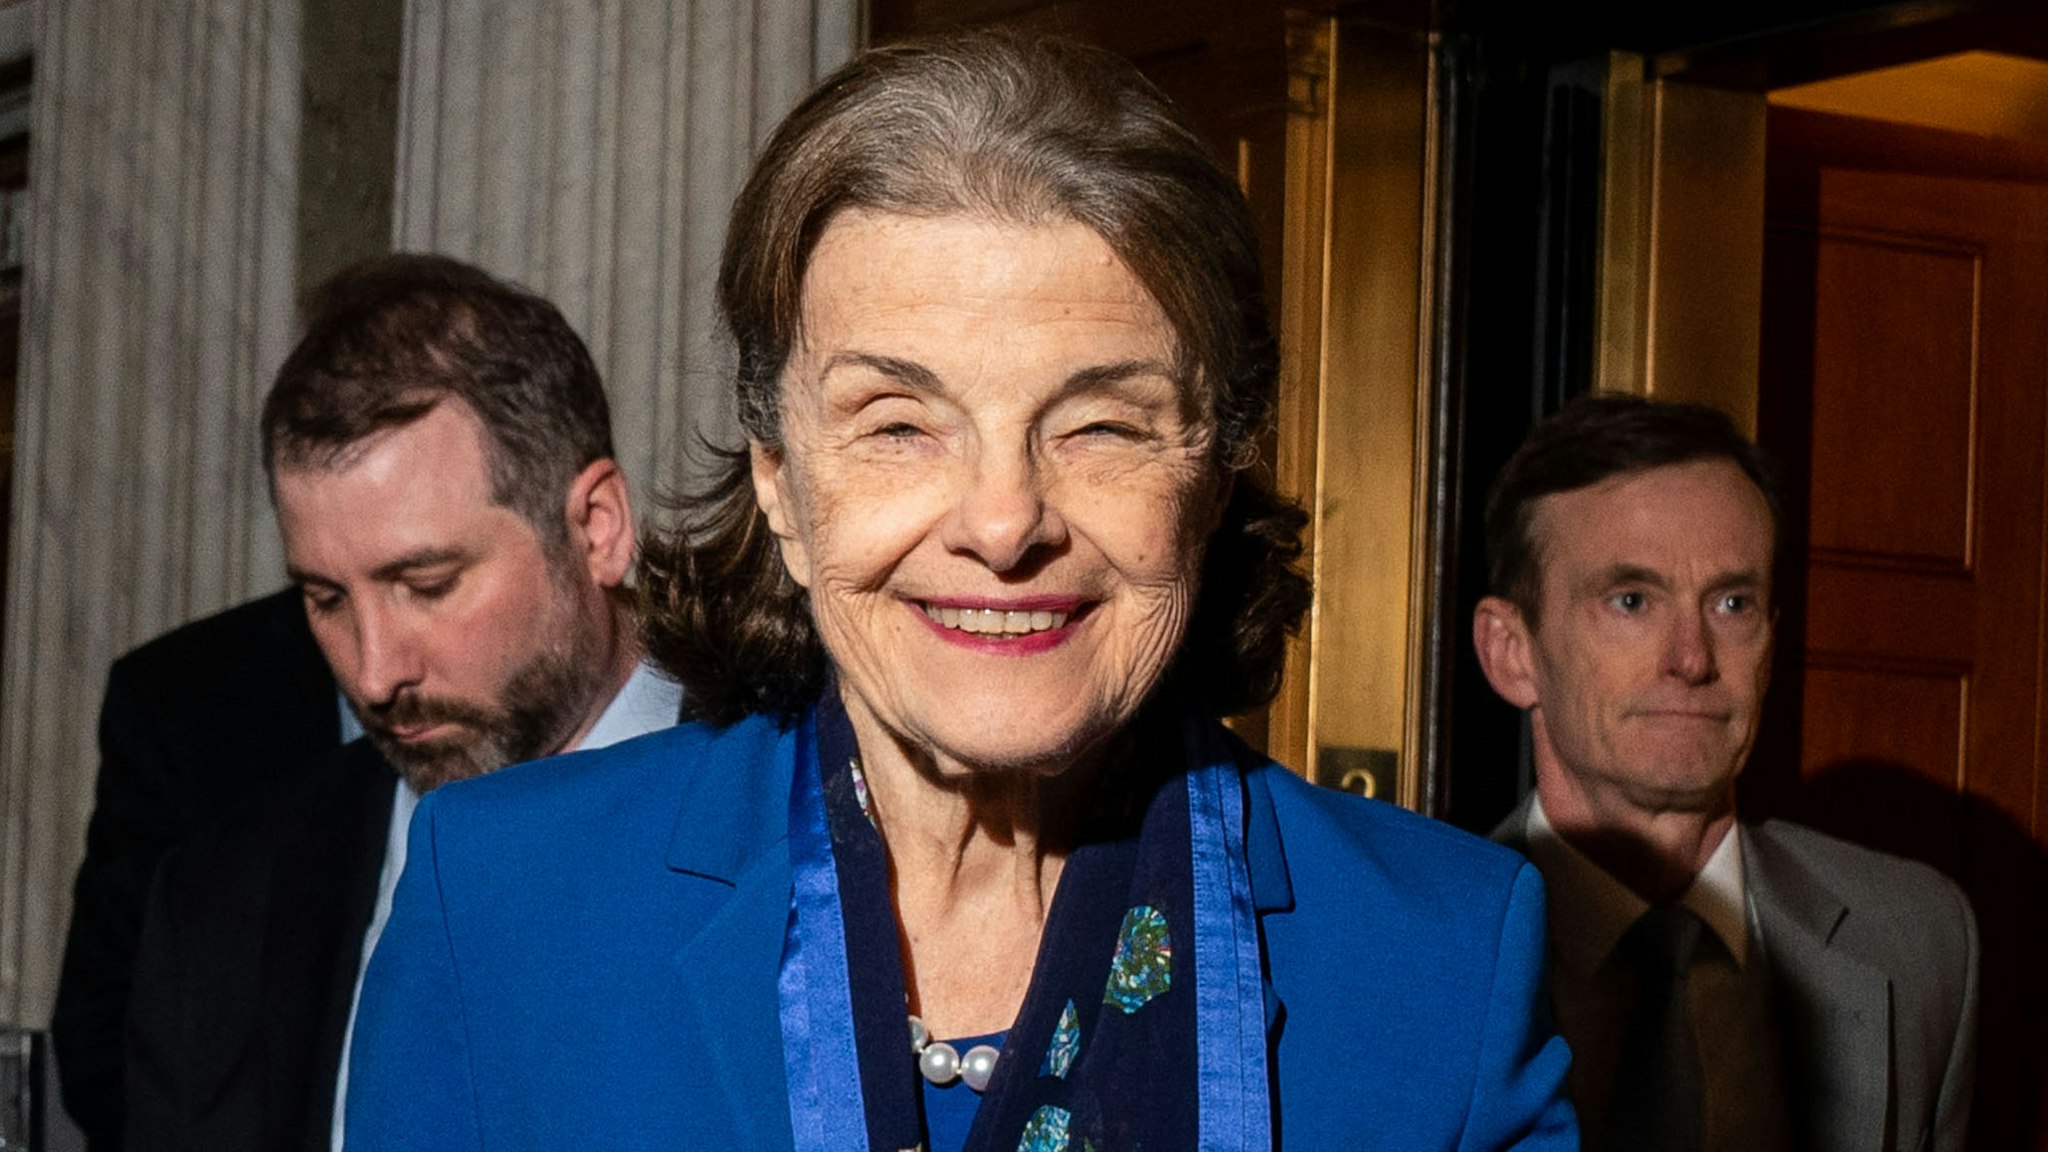 WASHINGTON, DC - FEBRUARY 14: Sen. Dianne Feinstein (D-CA) arrives at the Senate Chamber for a vote at the U.S. Capitol on Tuesday, Feb. 14, 2023 in Washington, DC. Feinstein, Californias longest-serving senator, announced she will not run for reelection next year, marking the end to one of the states most storied political careers. She plans to remain in office through the end of her term.